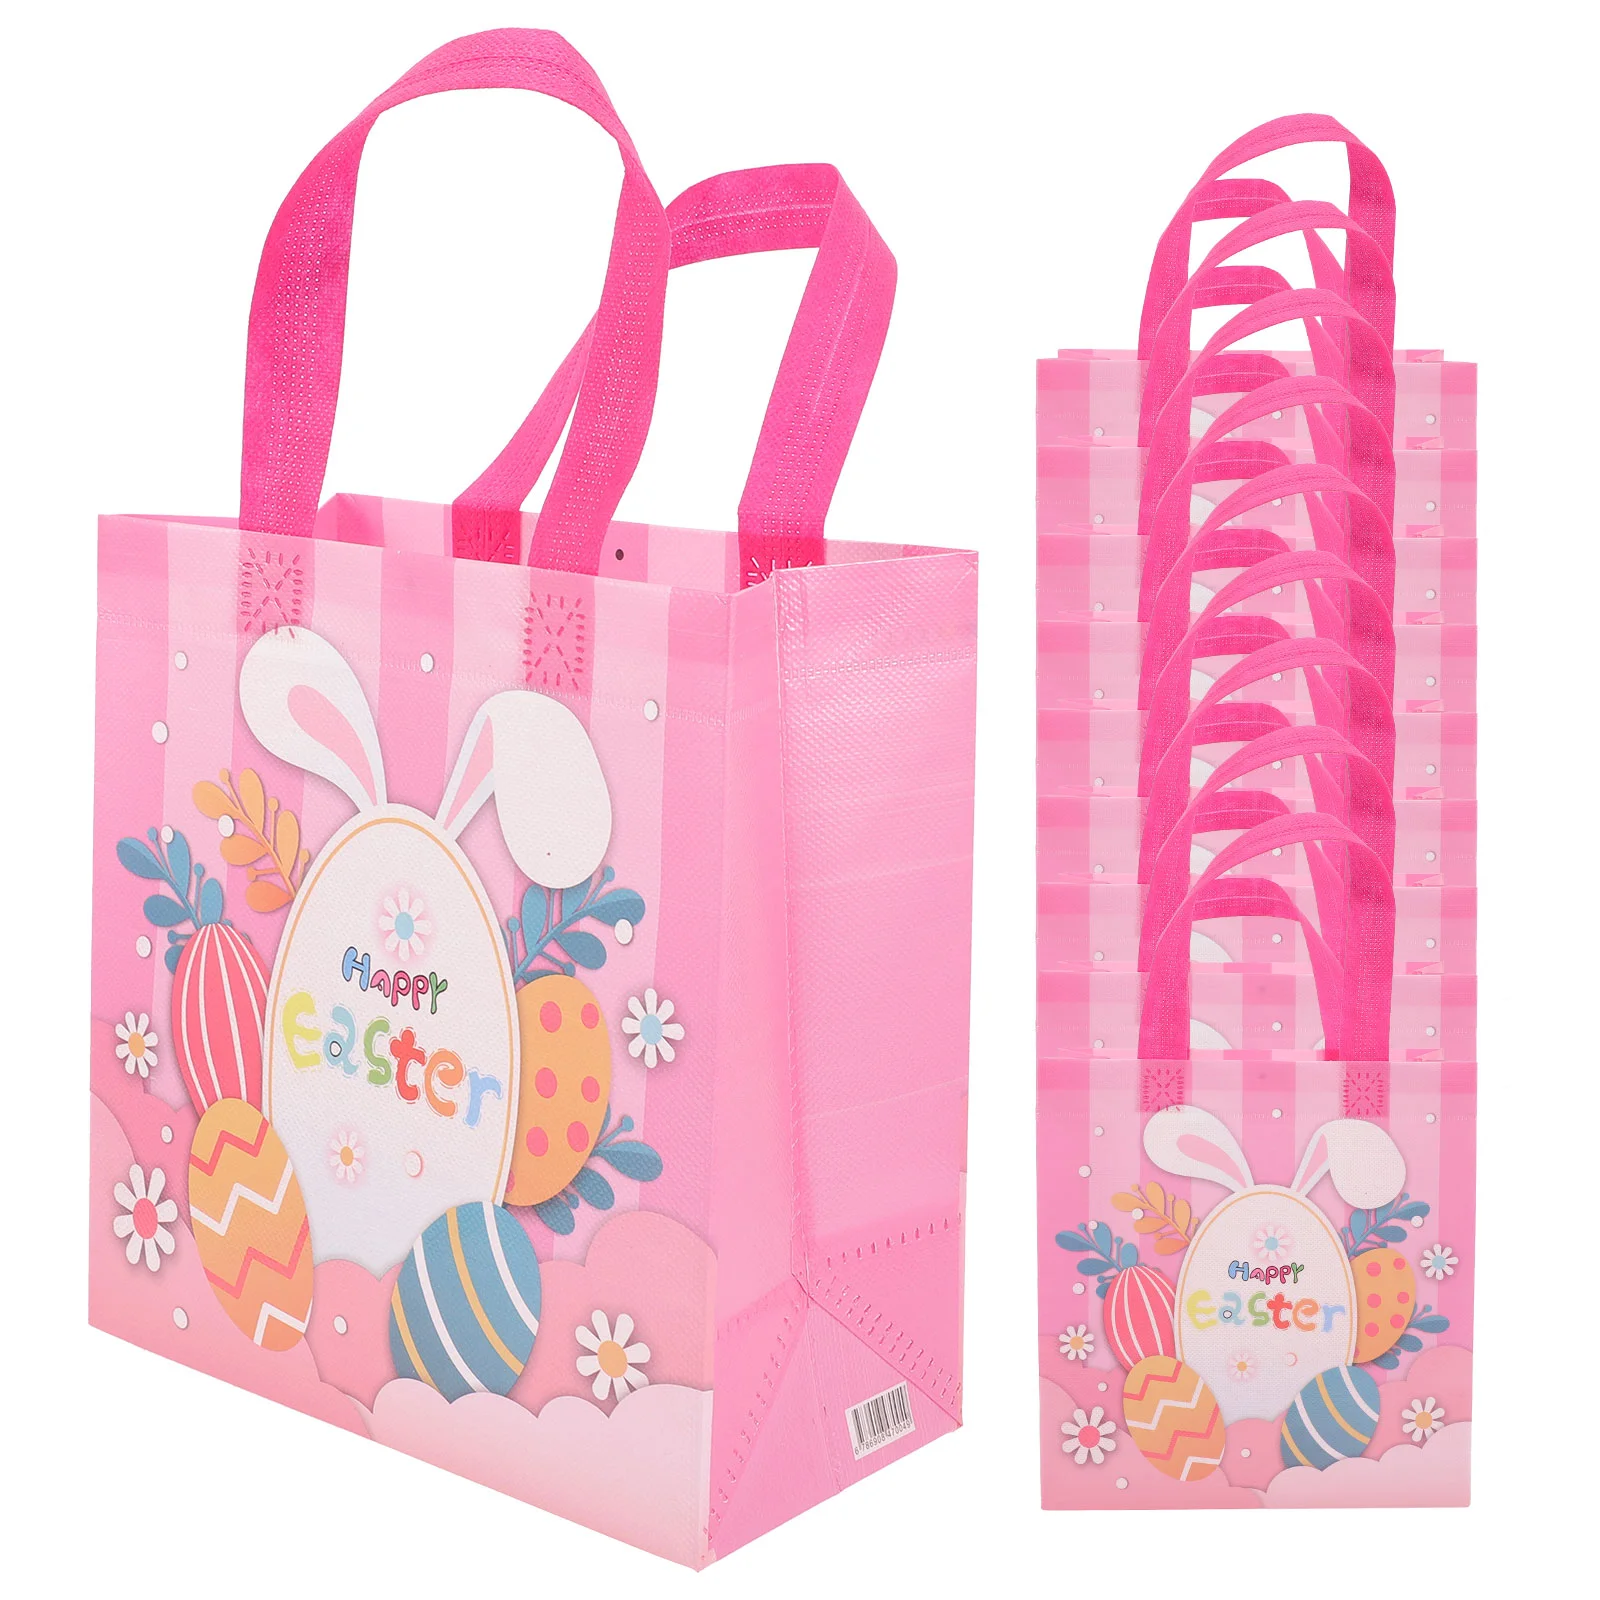 

Easter Gift Bunny Paper Party Treat Rabbit Pouches Packing Candy Goodie Basket Wrapping Fabric Clothes Wedding Egg Souvenir Tote